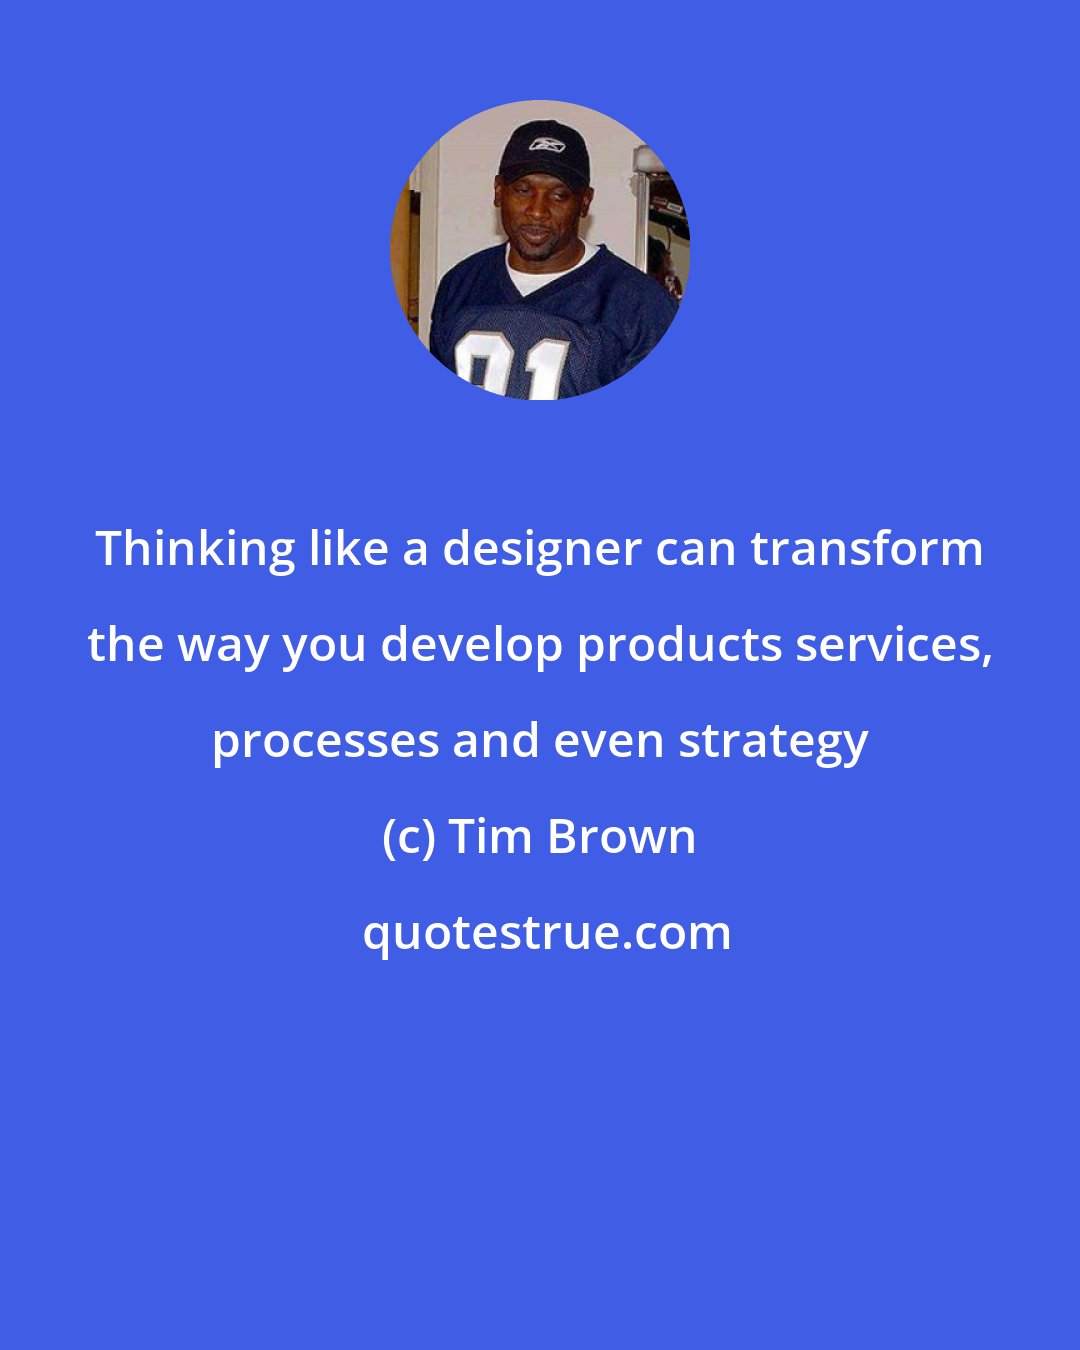 Tim Brown: Thinking like a designer can transform the way you develop products services, processes and even strategy